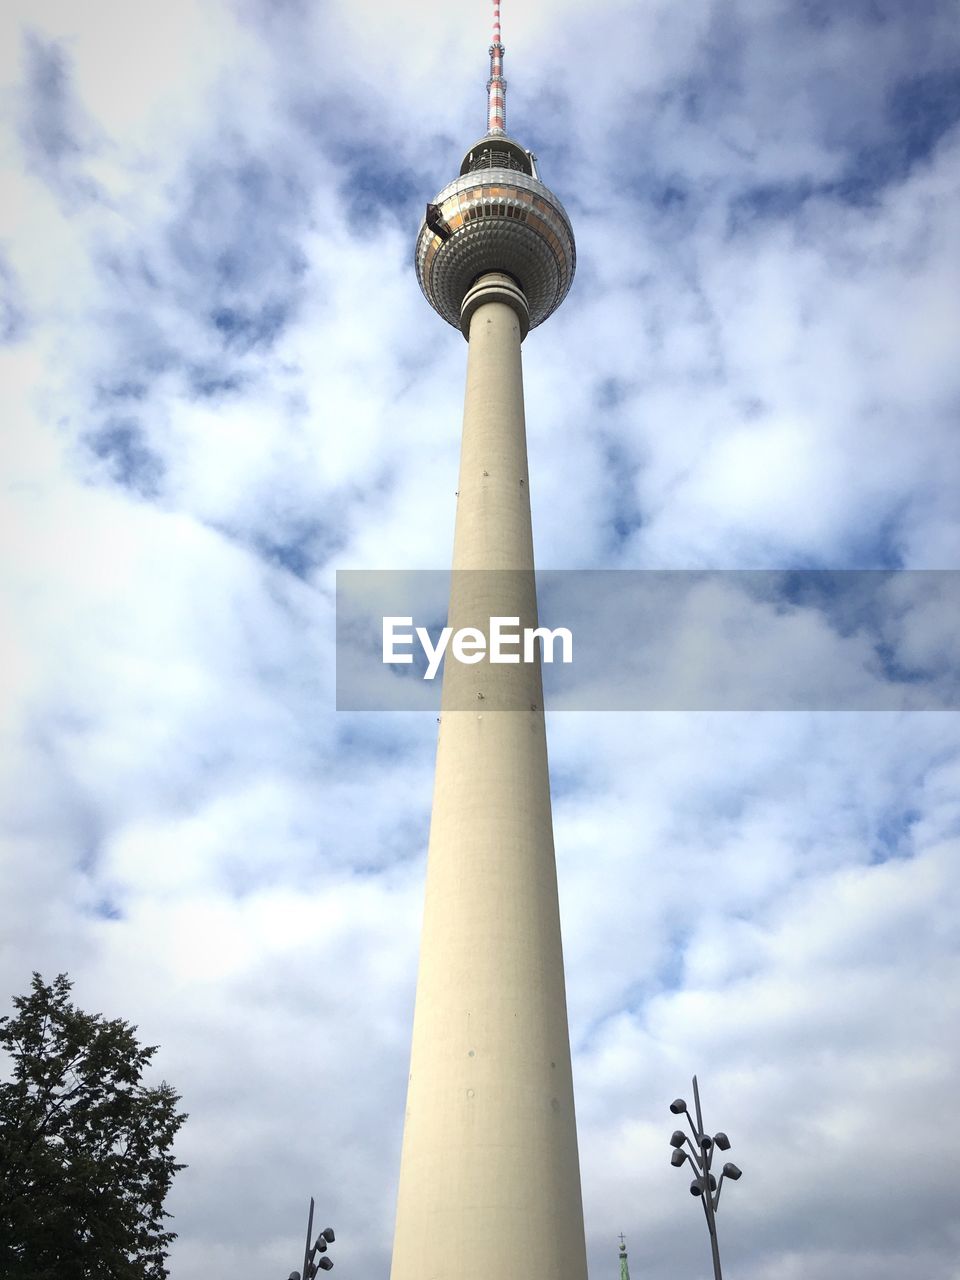 LOW ANGLE VIEW OF COMMUNICATIONS TOWER IN CITY